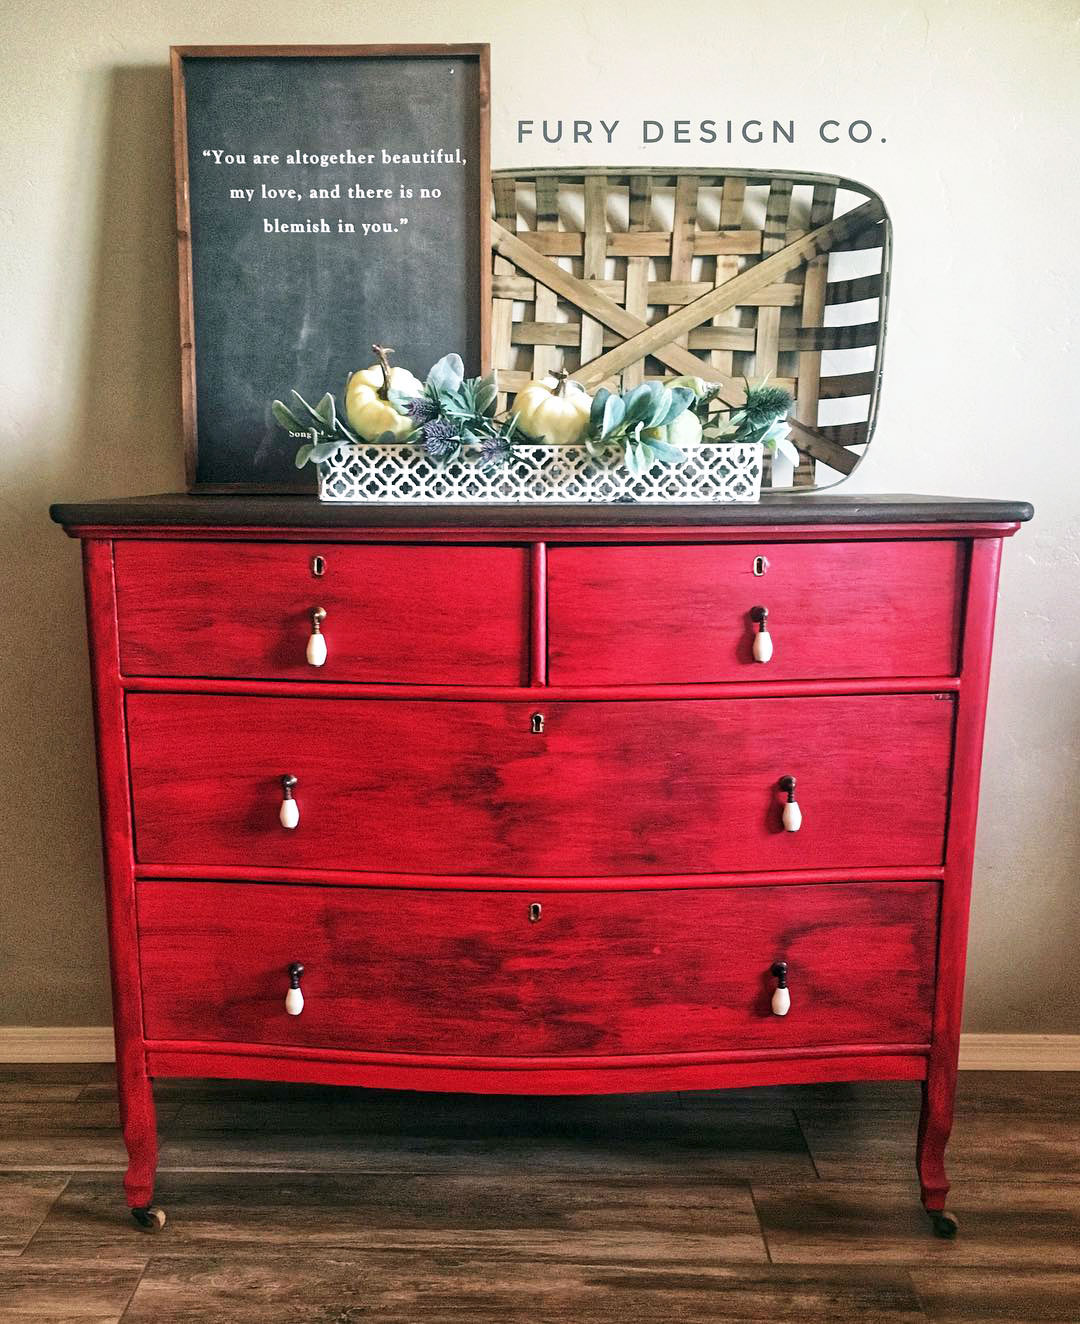 Staining furniture? We stained our vintage barrister's cabinet crimson red  - MyFixitUpLife